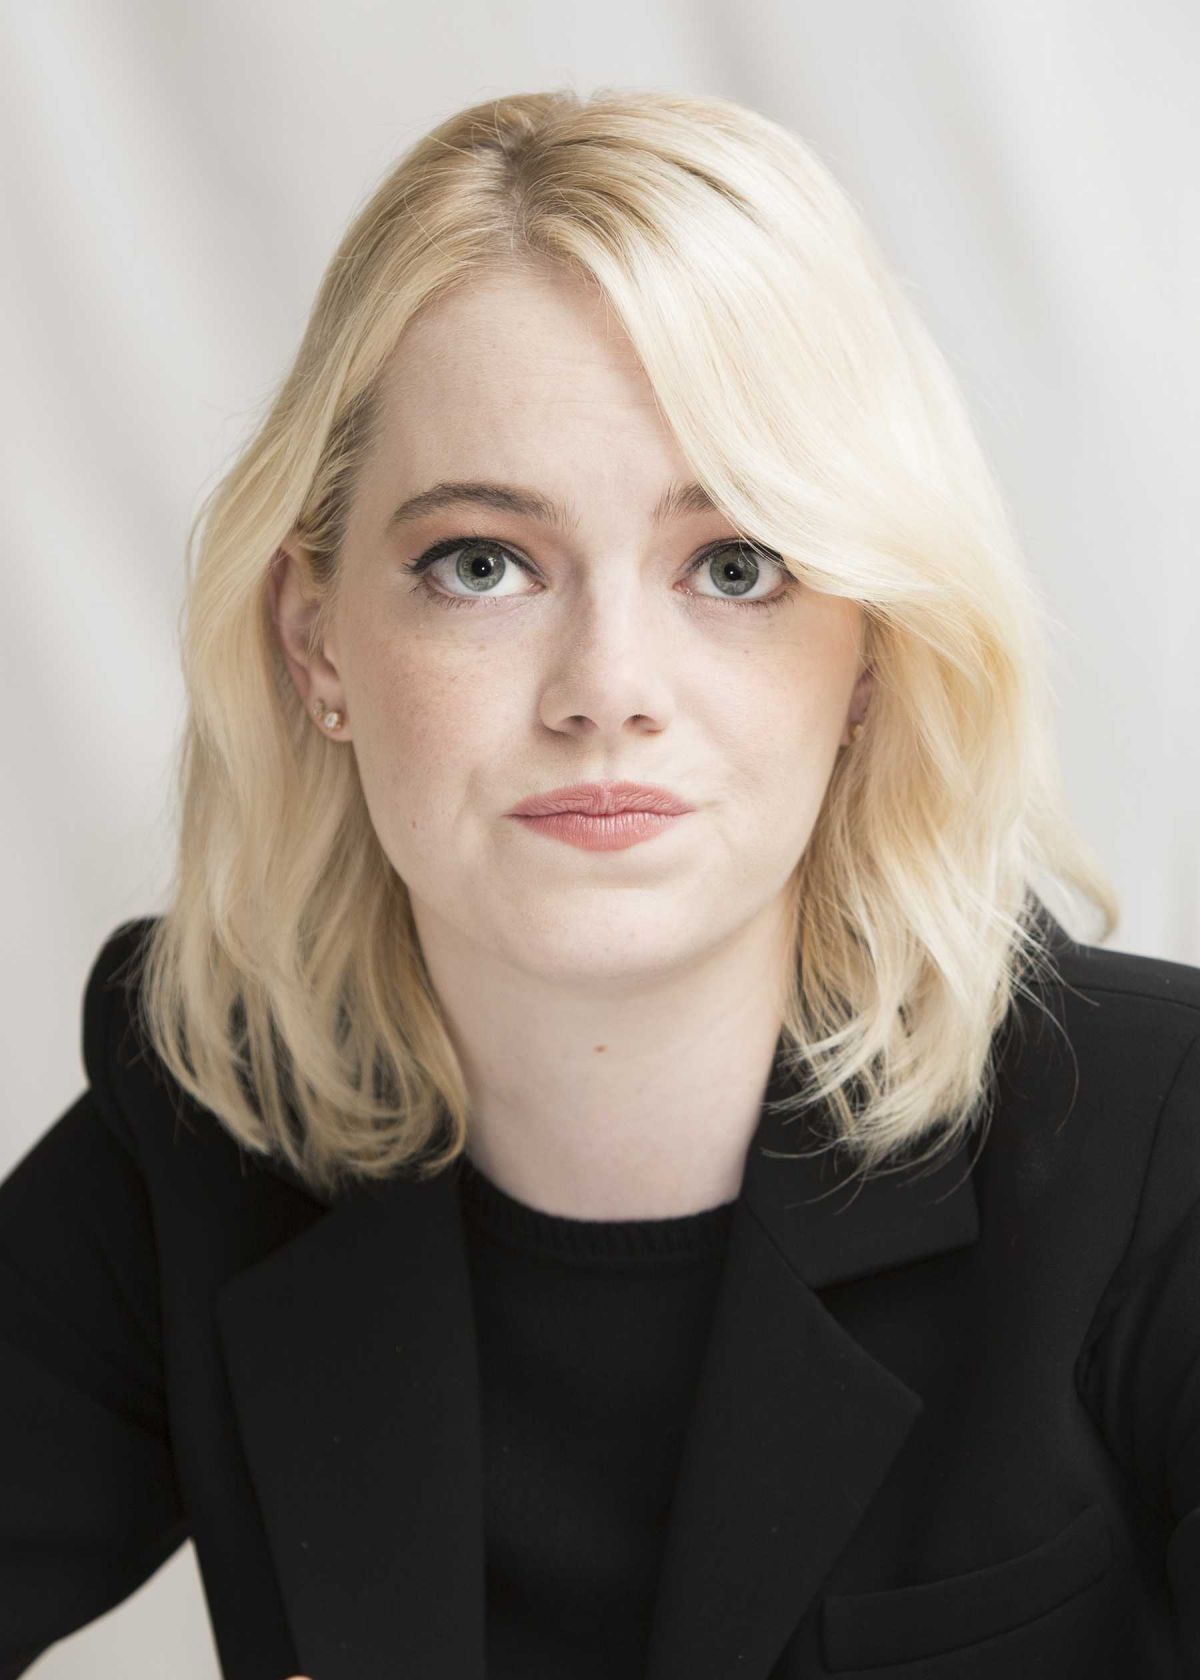 Emma Stone Battle Of The Sexes Press Conference At 2017 Toronto